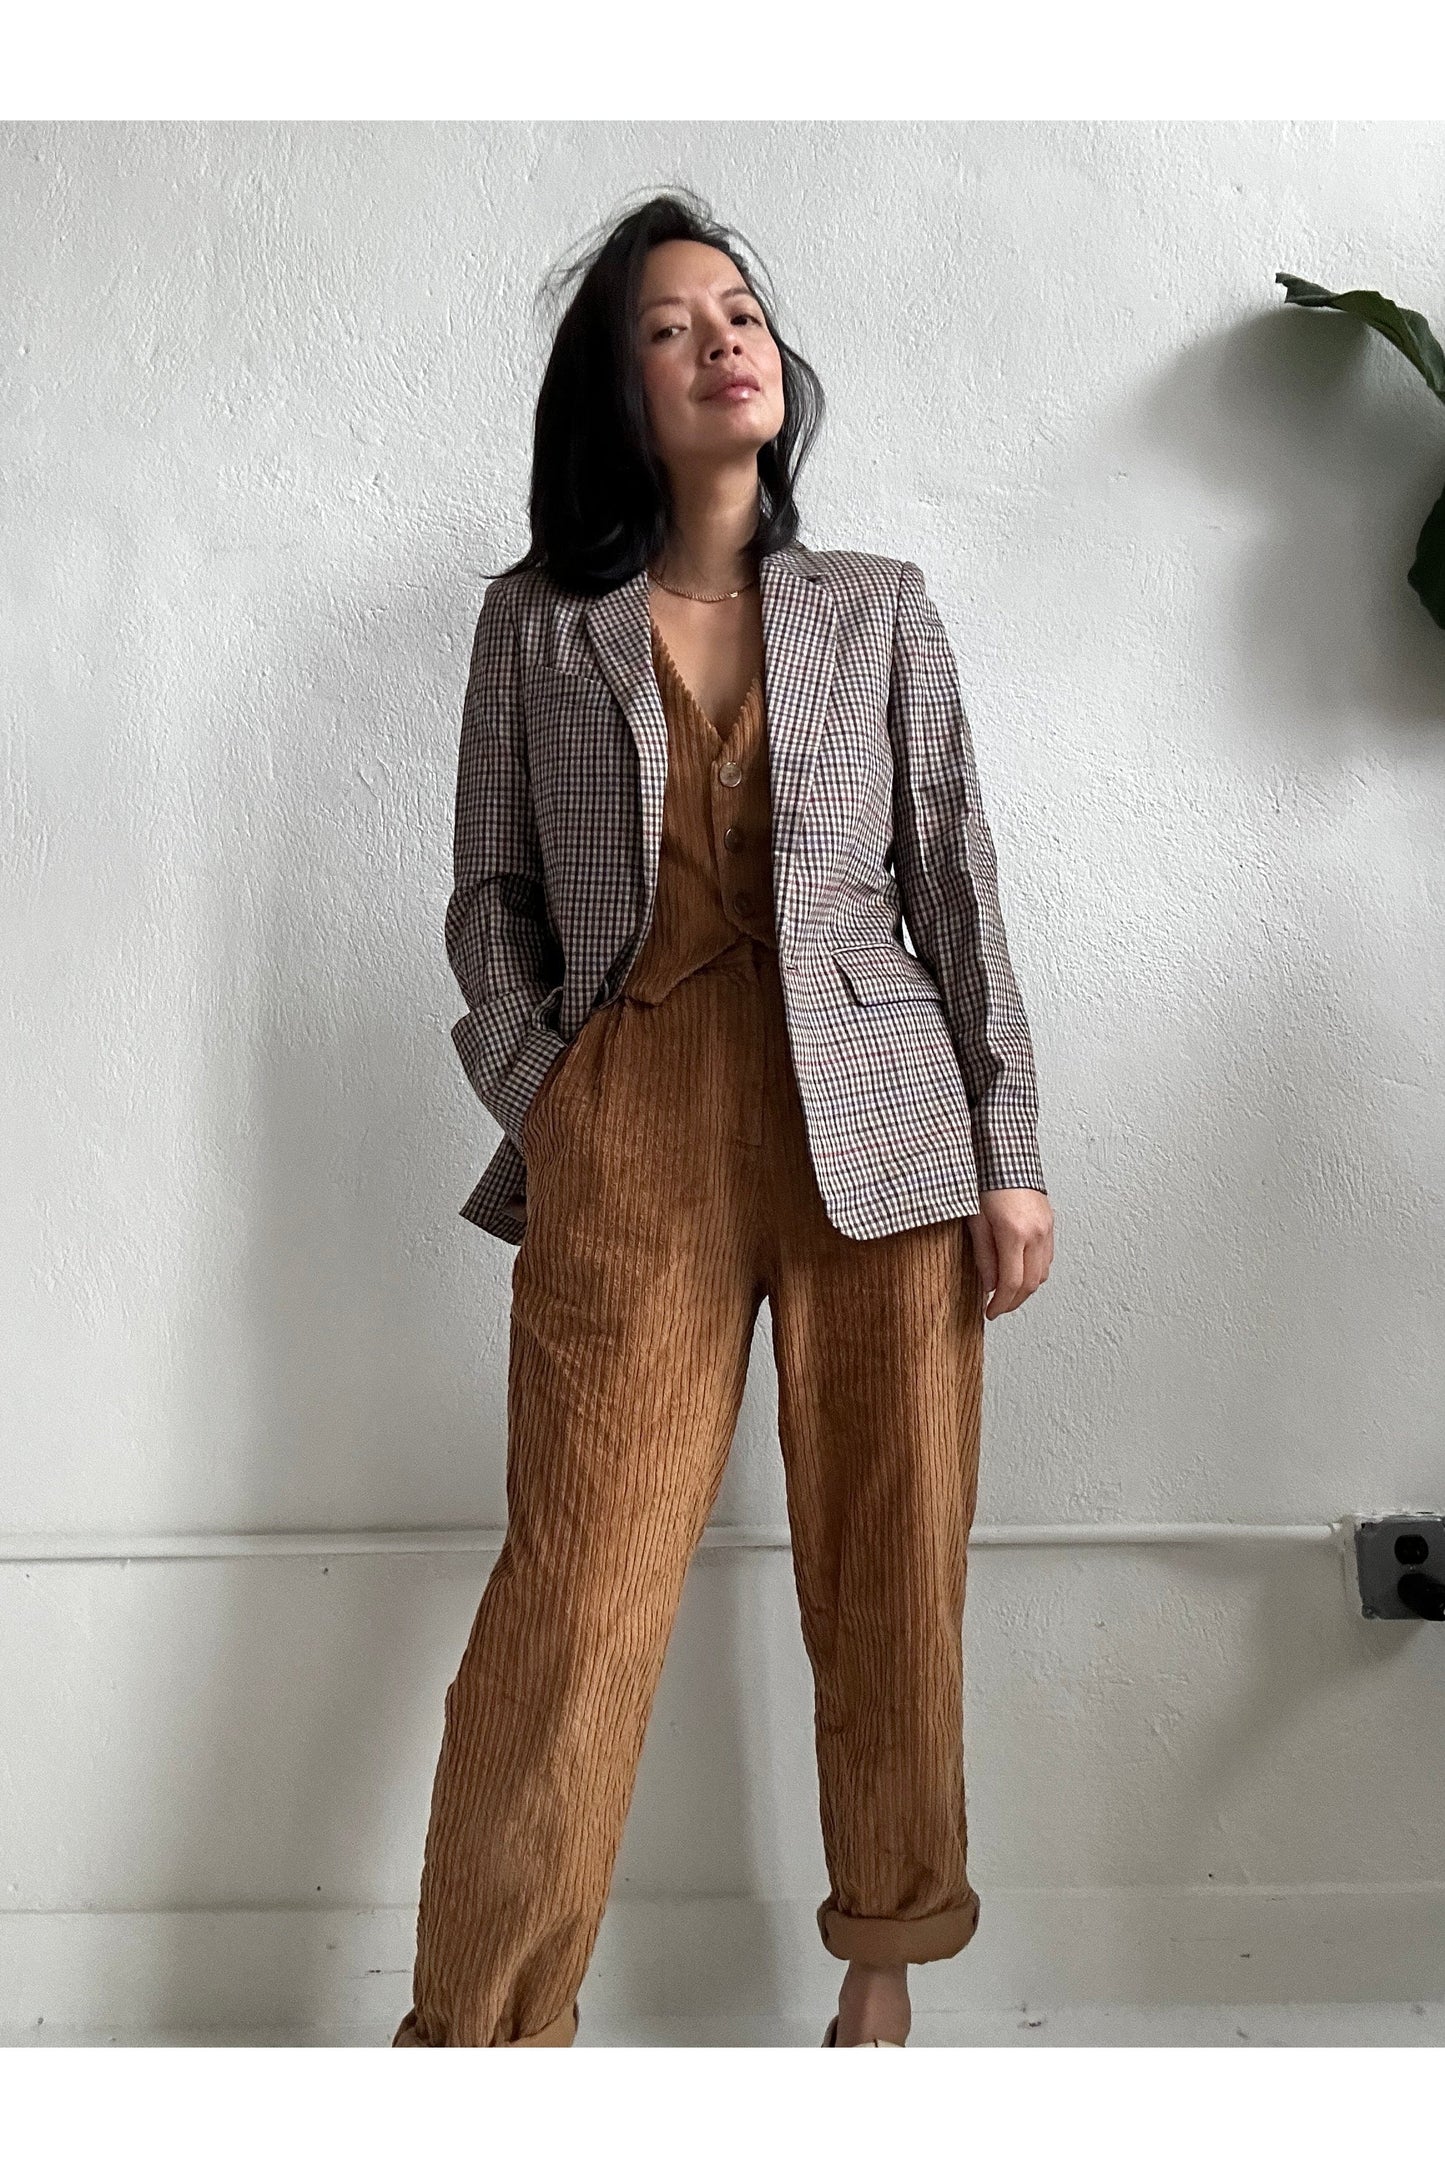 Marceaux Pant in Wide Corduroy Pants CHRISTINE ALCALAY   